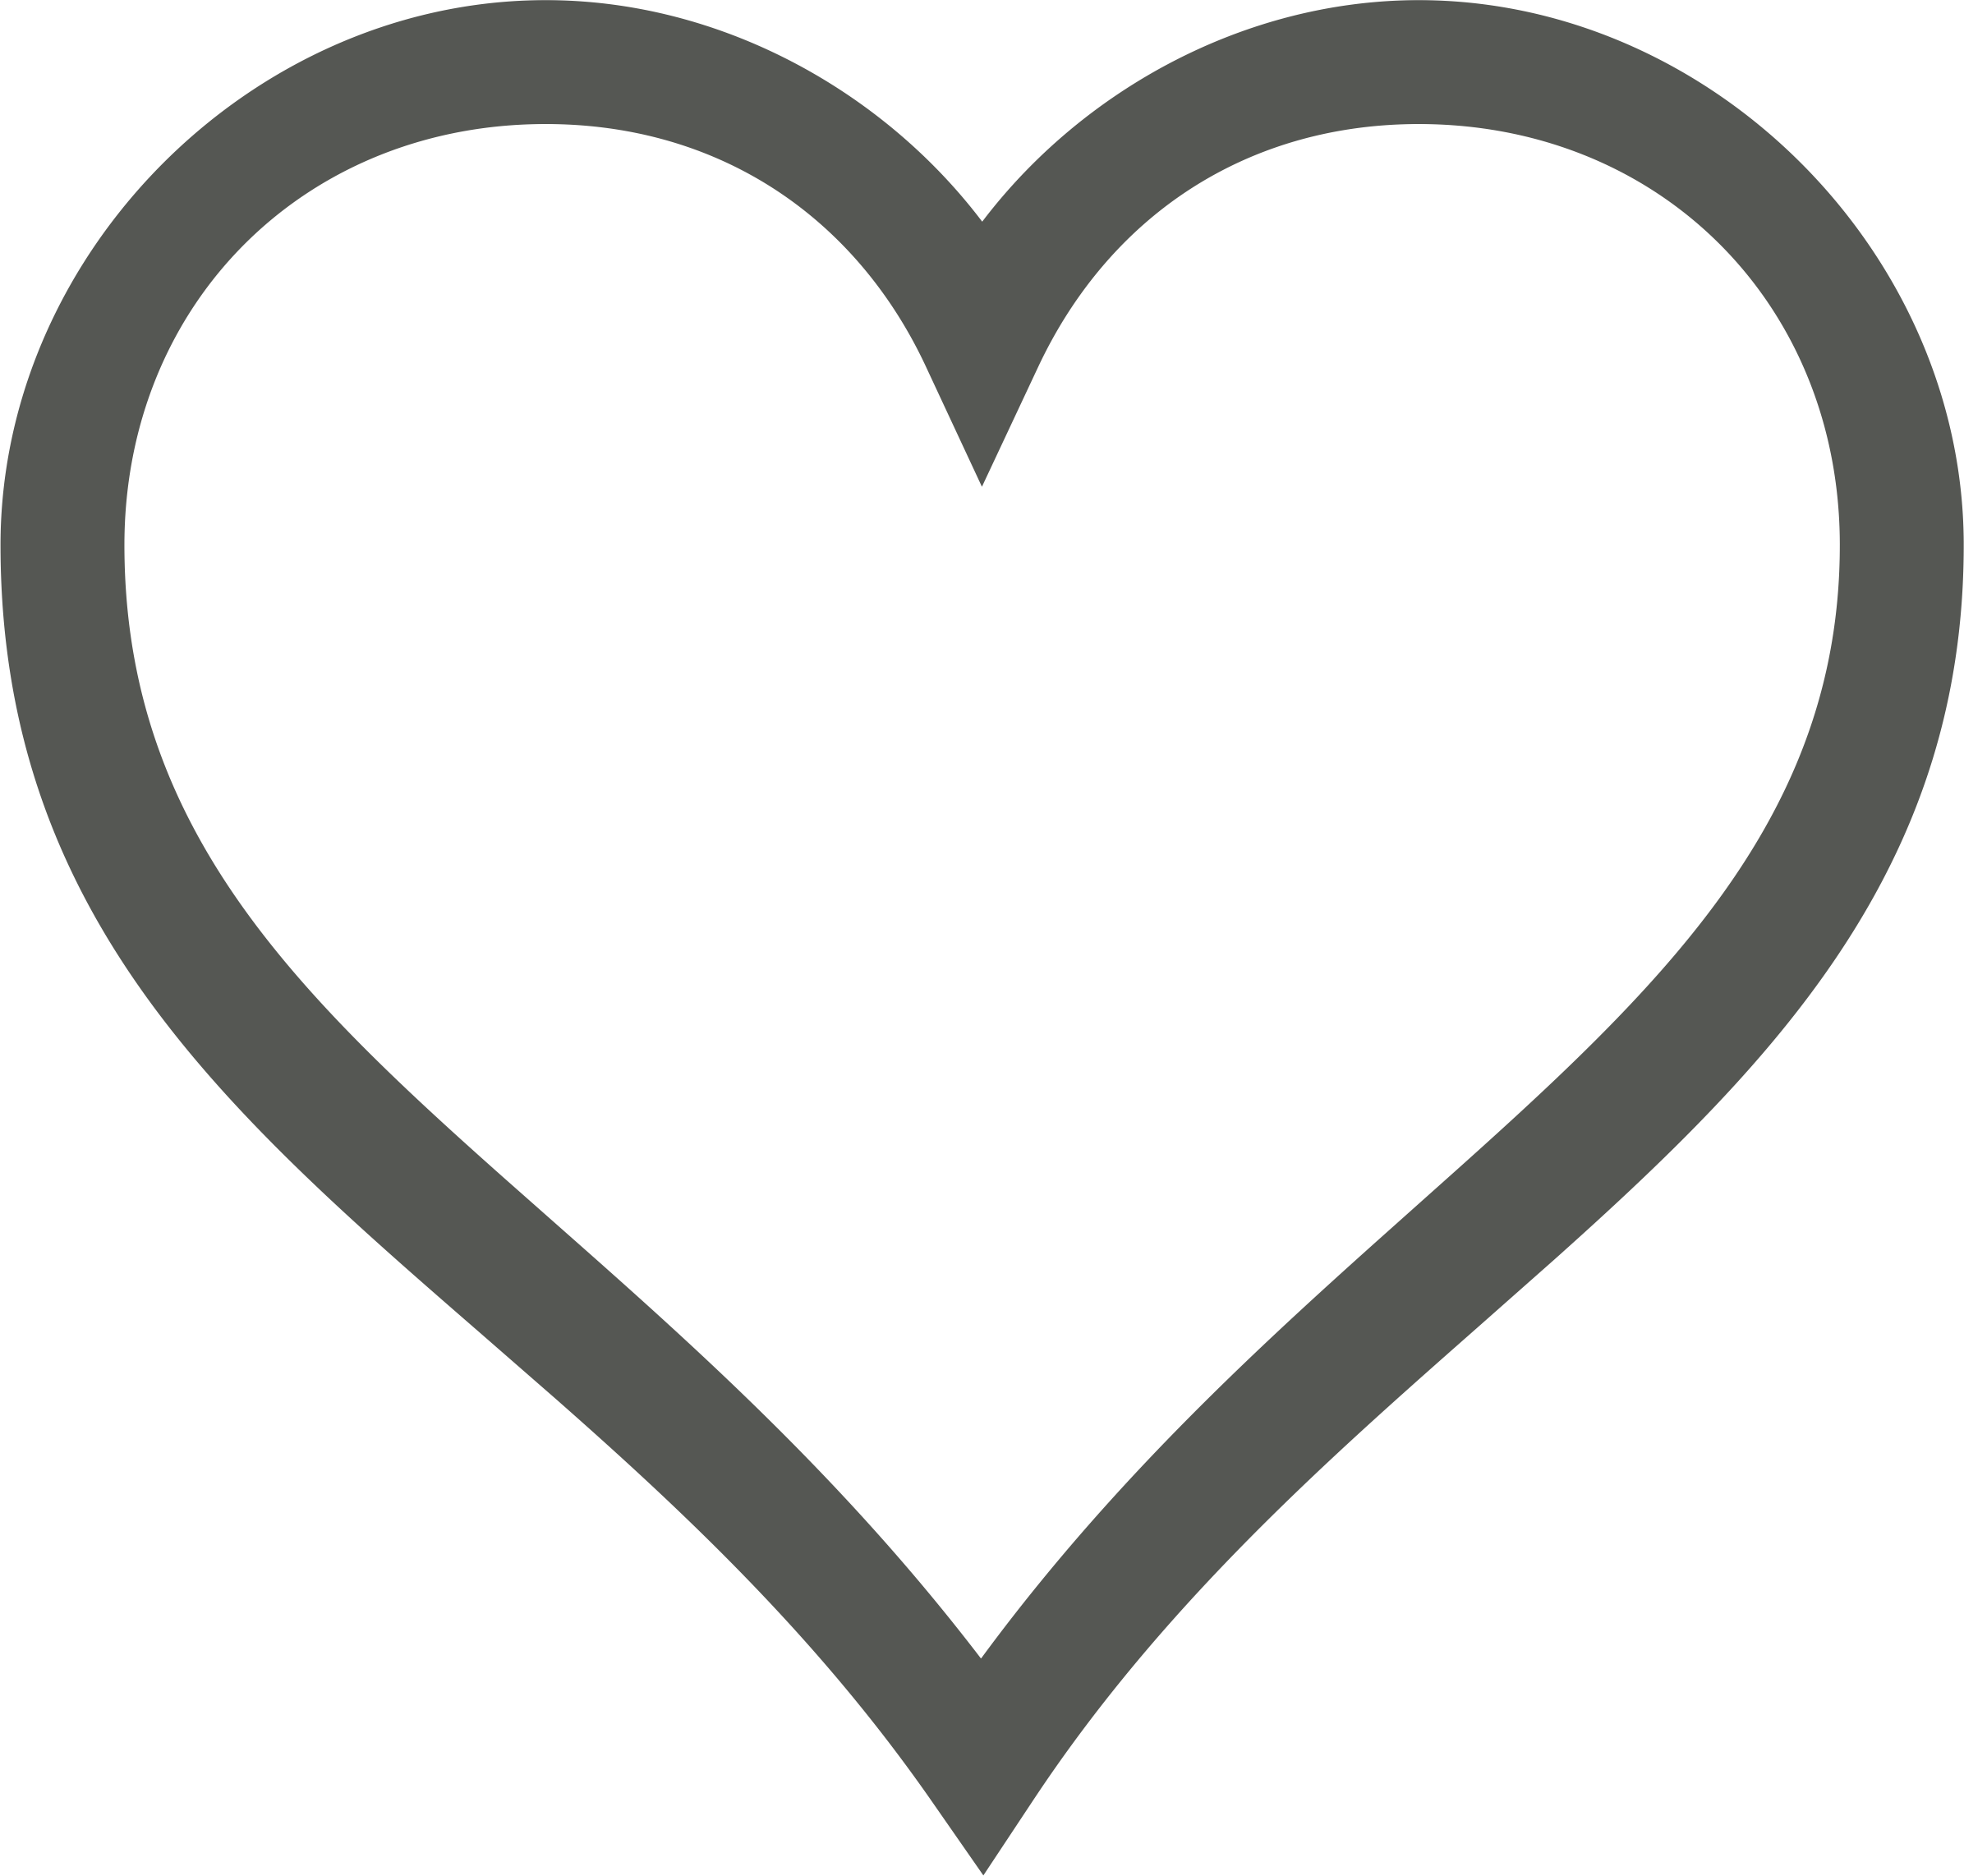 Simple Heart Icon- Made in Sketch | Icons, Pictogram and Logos